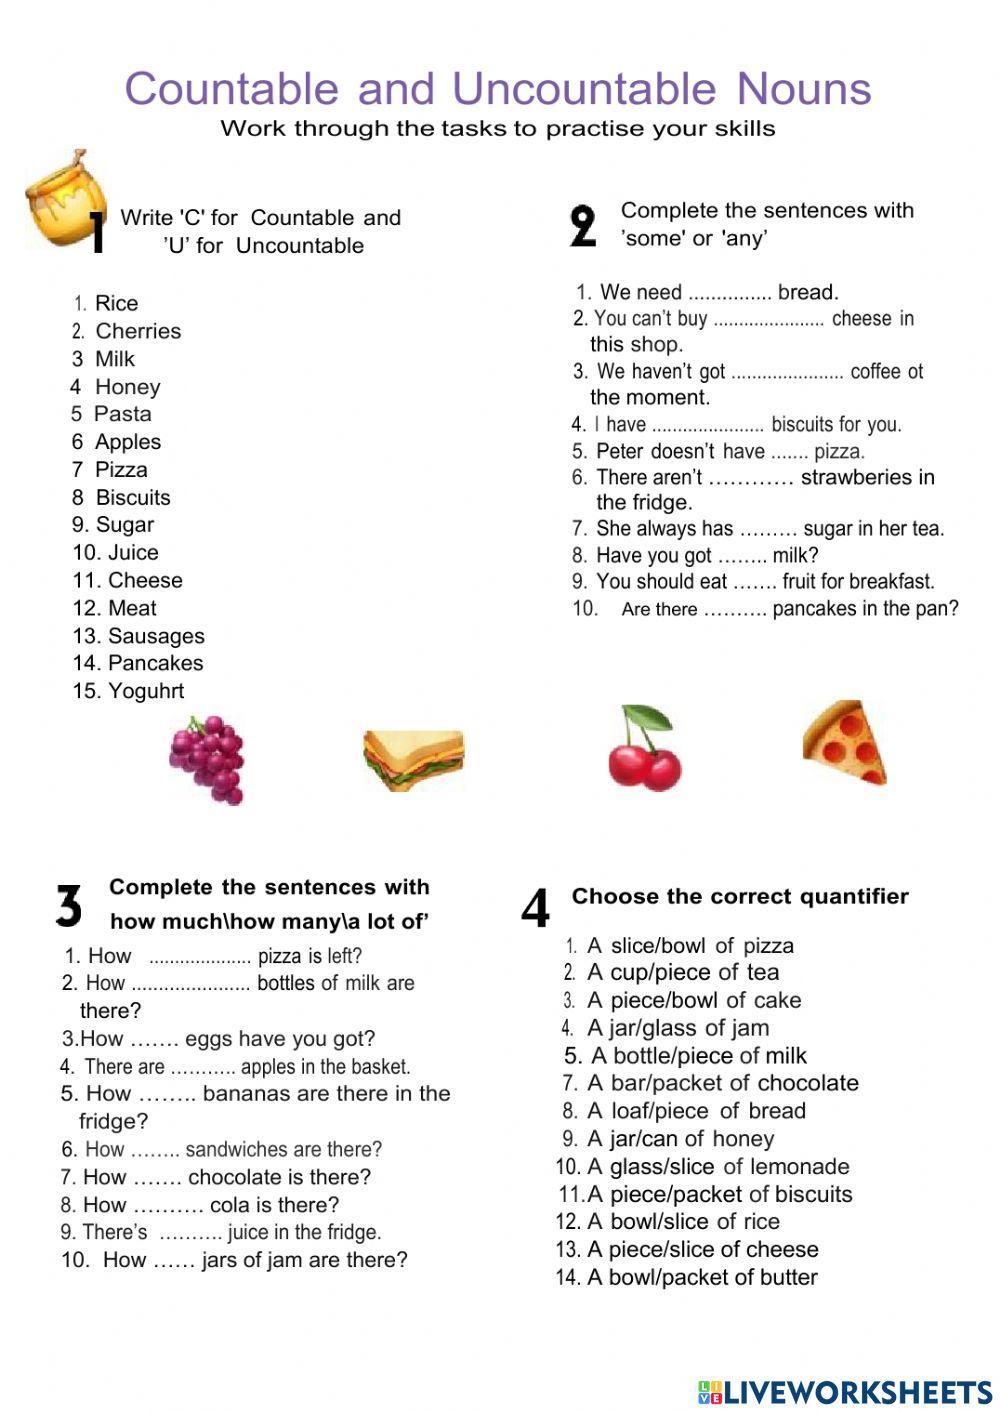 Food and drink: countable and uncountable nouns